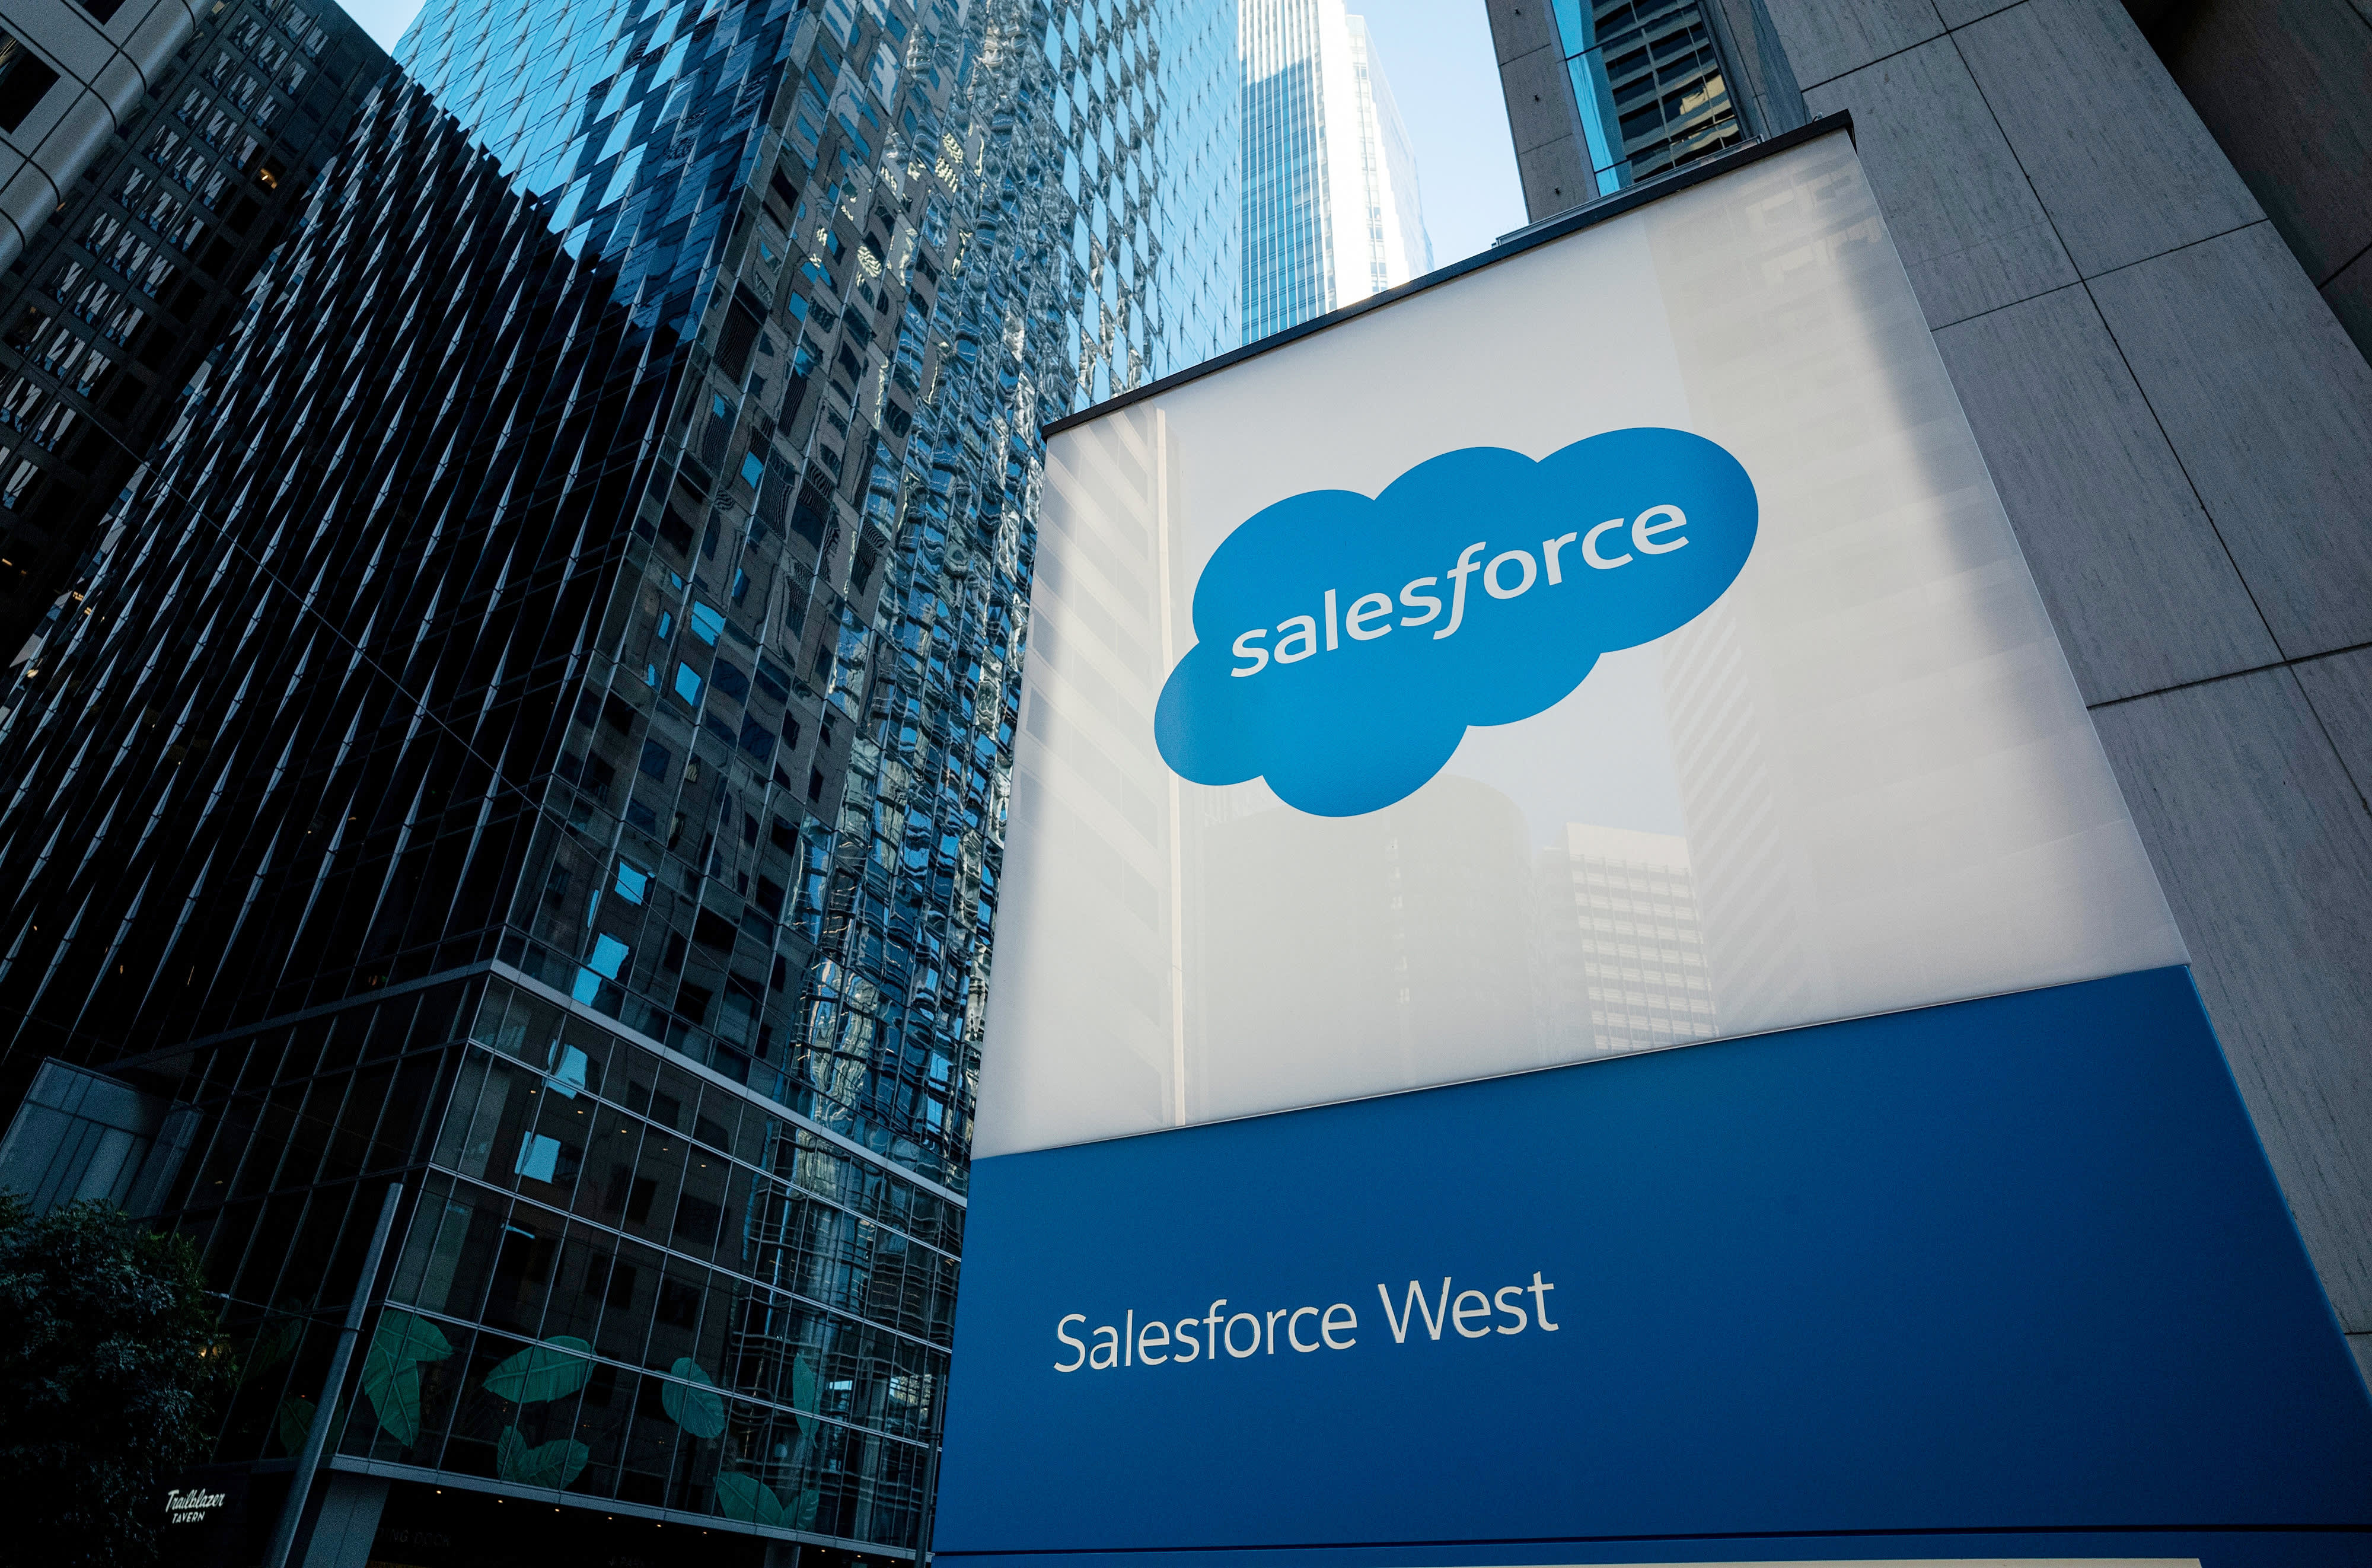 Salesforce's cost-cutting plan is a much-needed move for economic downturn